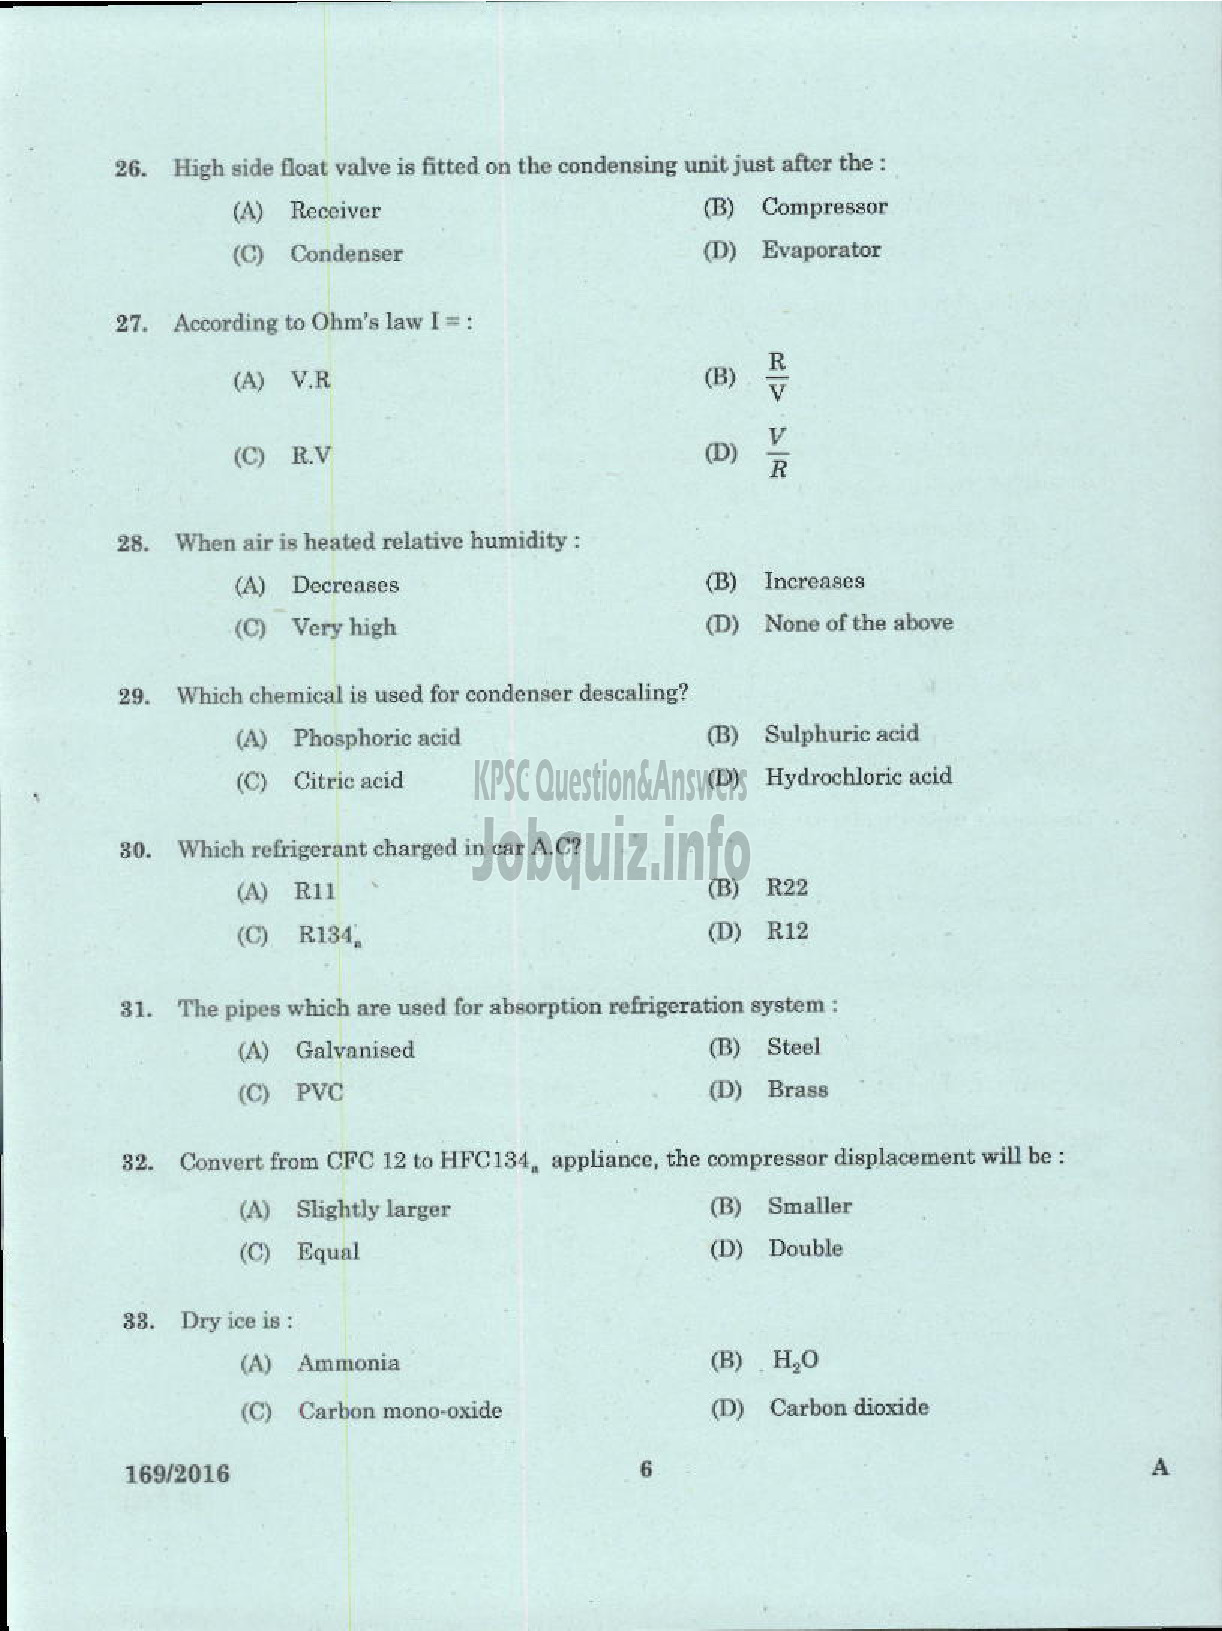 Kerala PSC Question Paper - TRADESMAN REFRIGERATION AND AIR CONDITIONING TECHNICAL EDUCATION-4